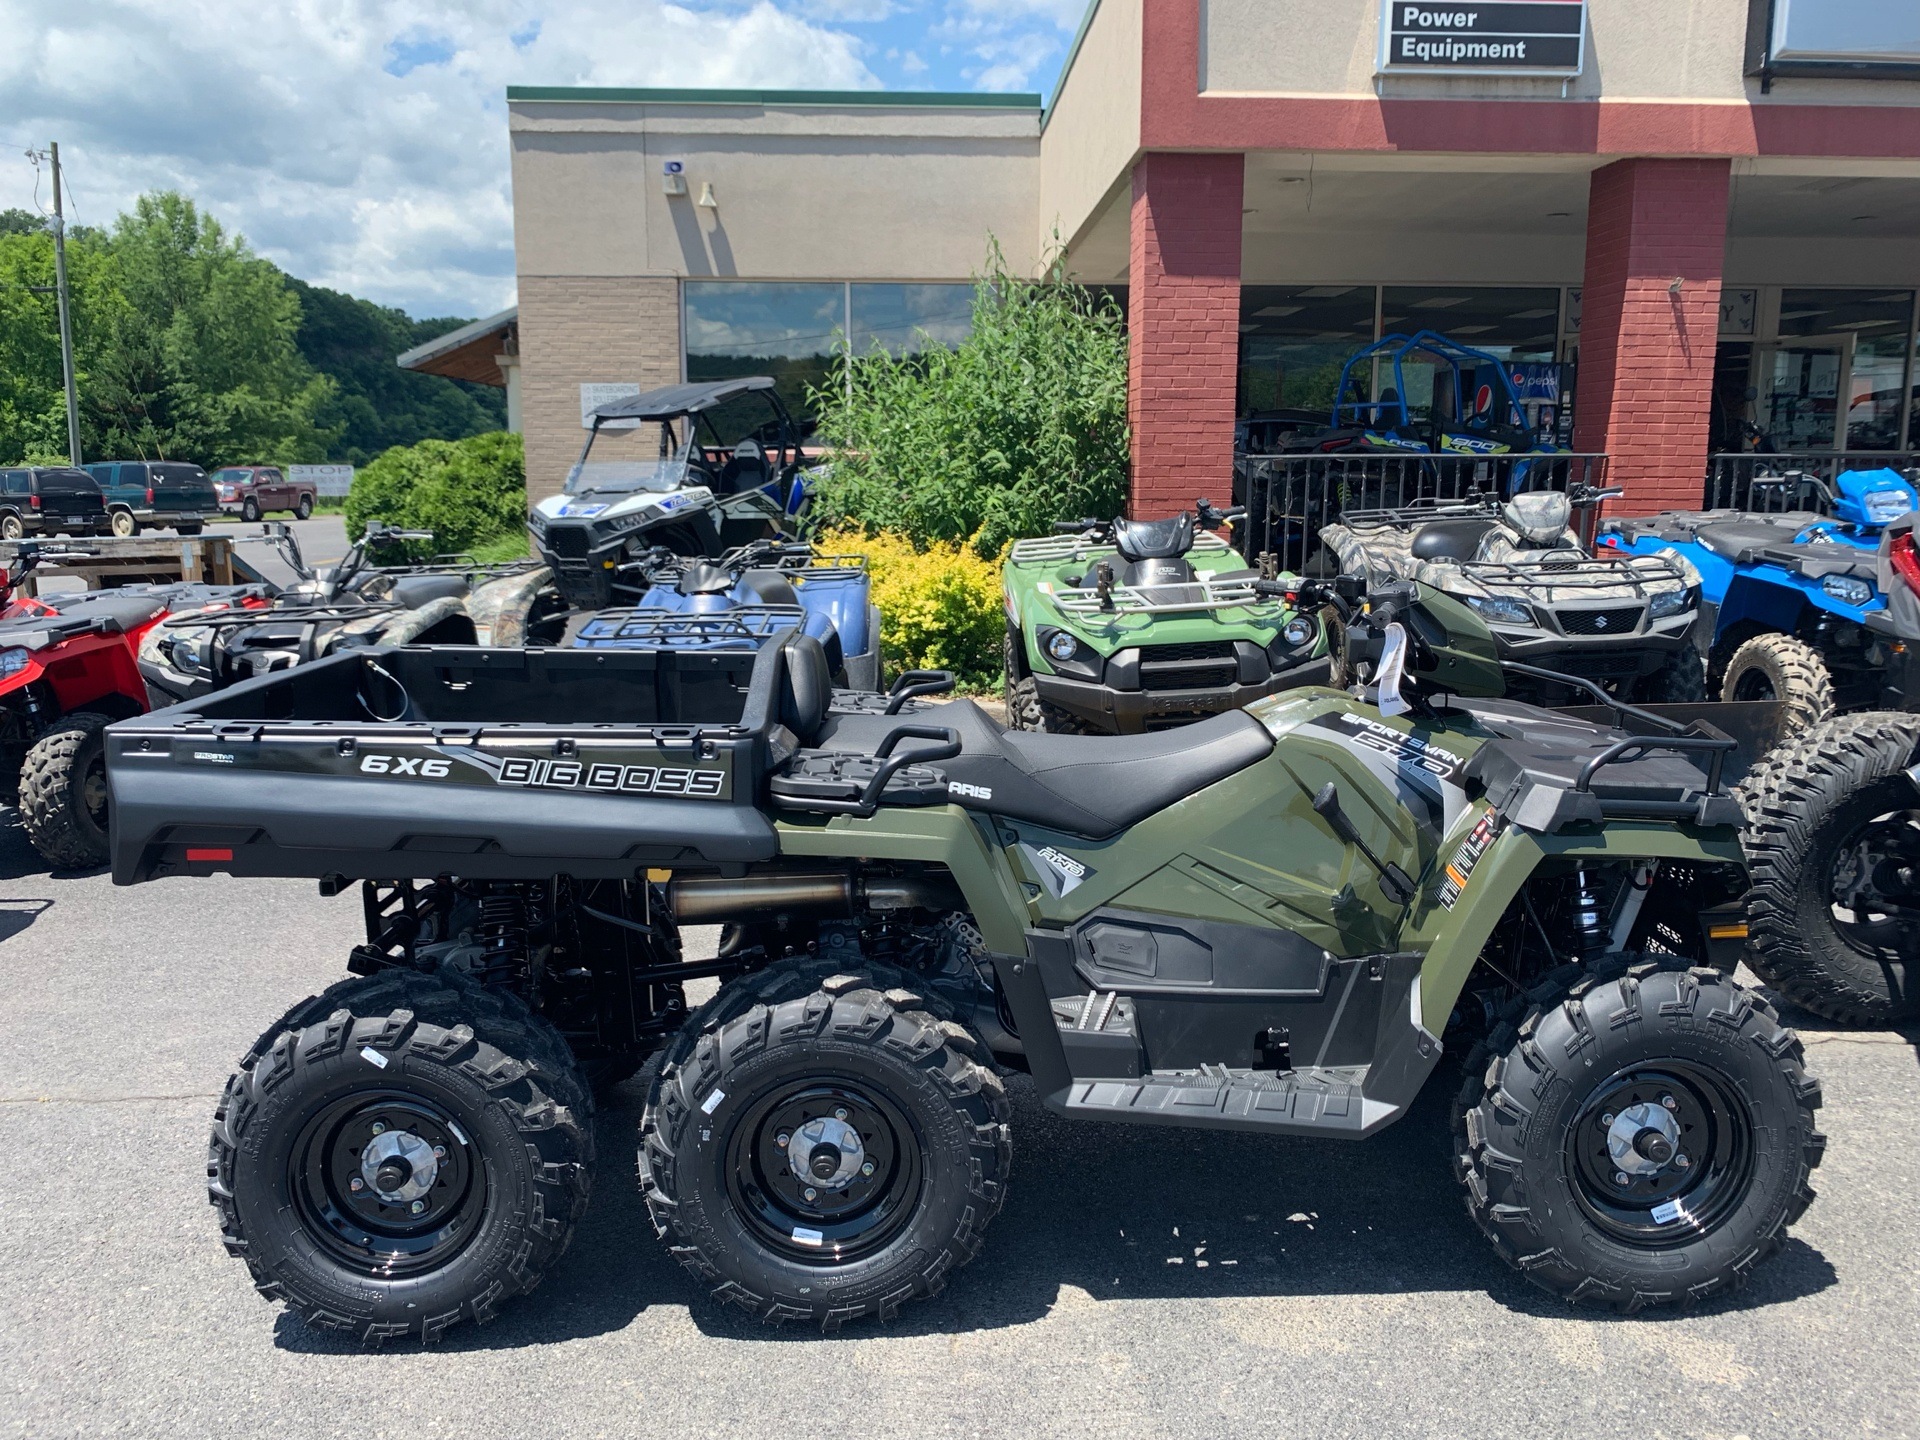 2019 6x6 Big Boss 570 EPS For Sale WV 139374